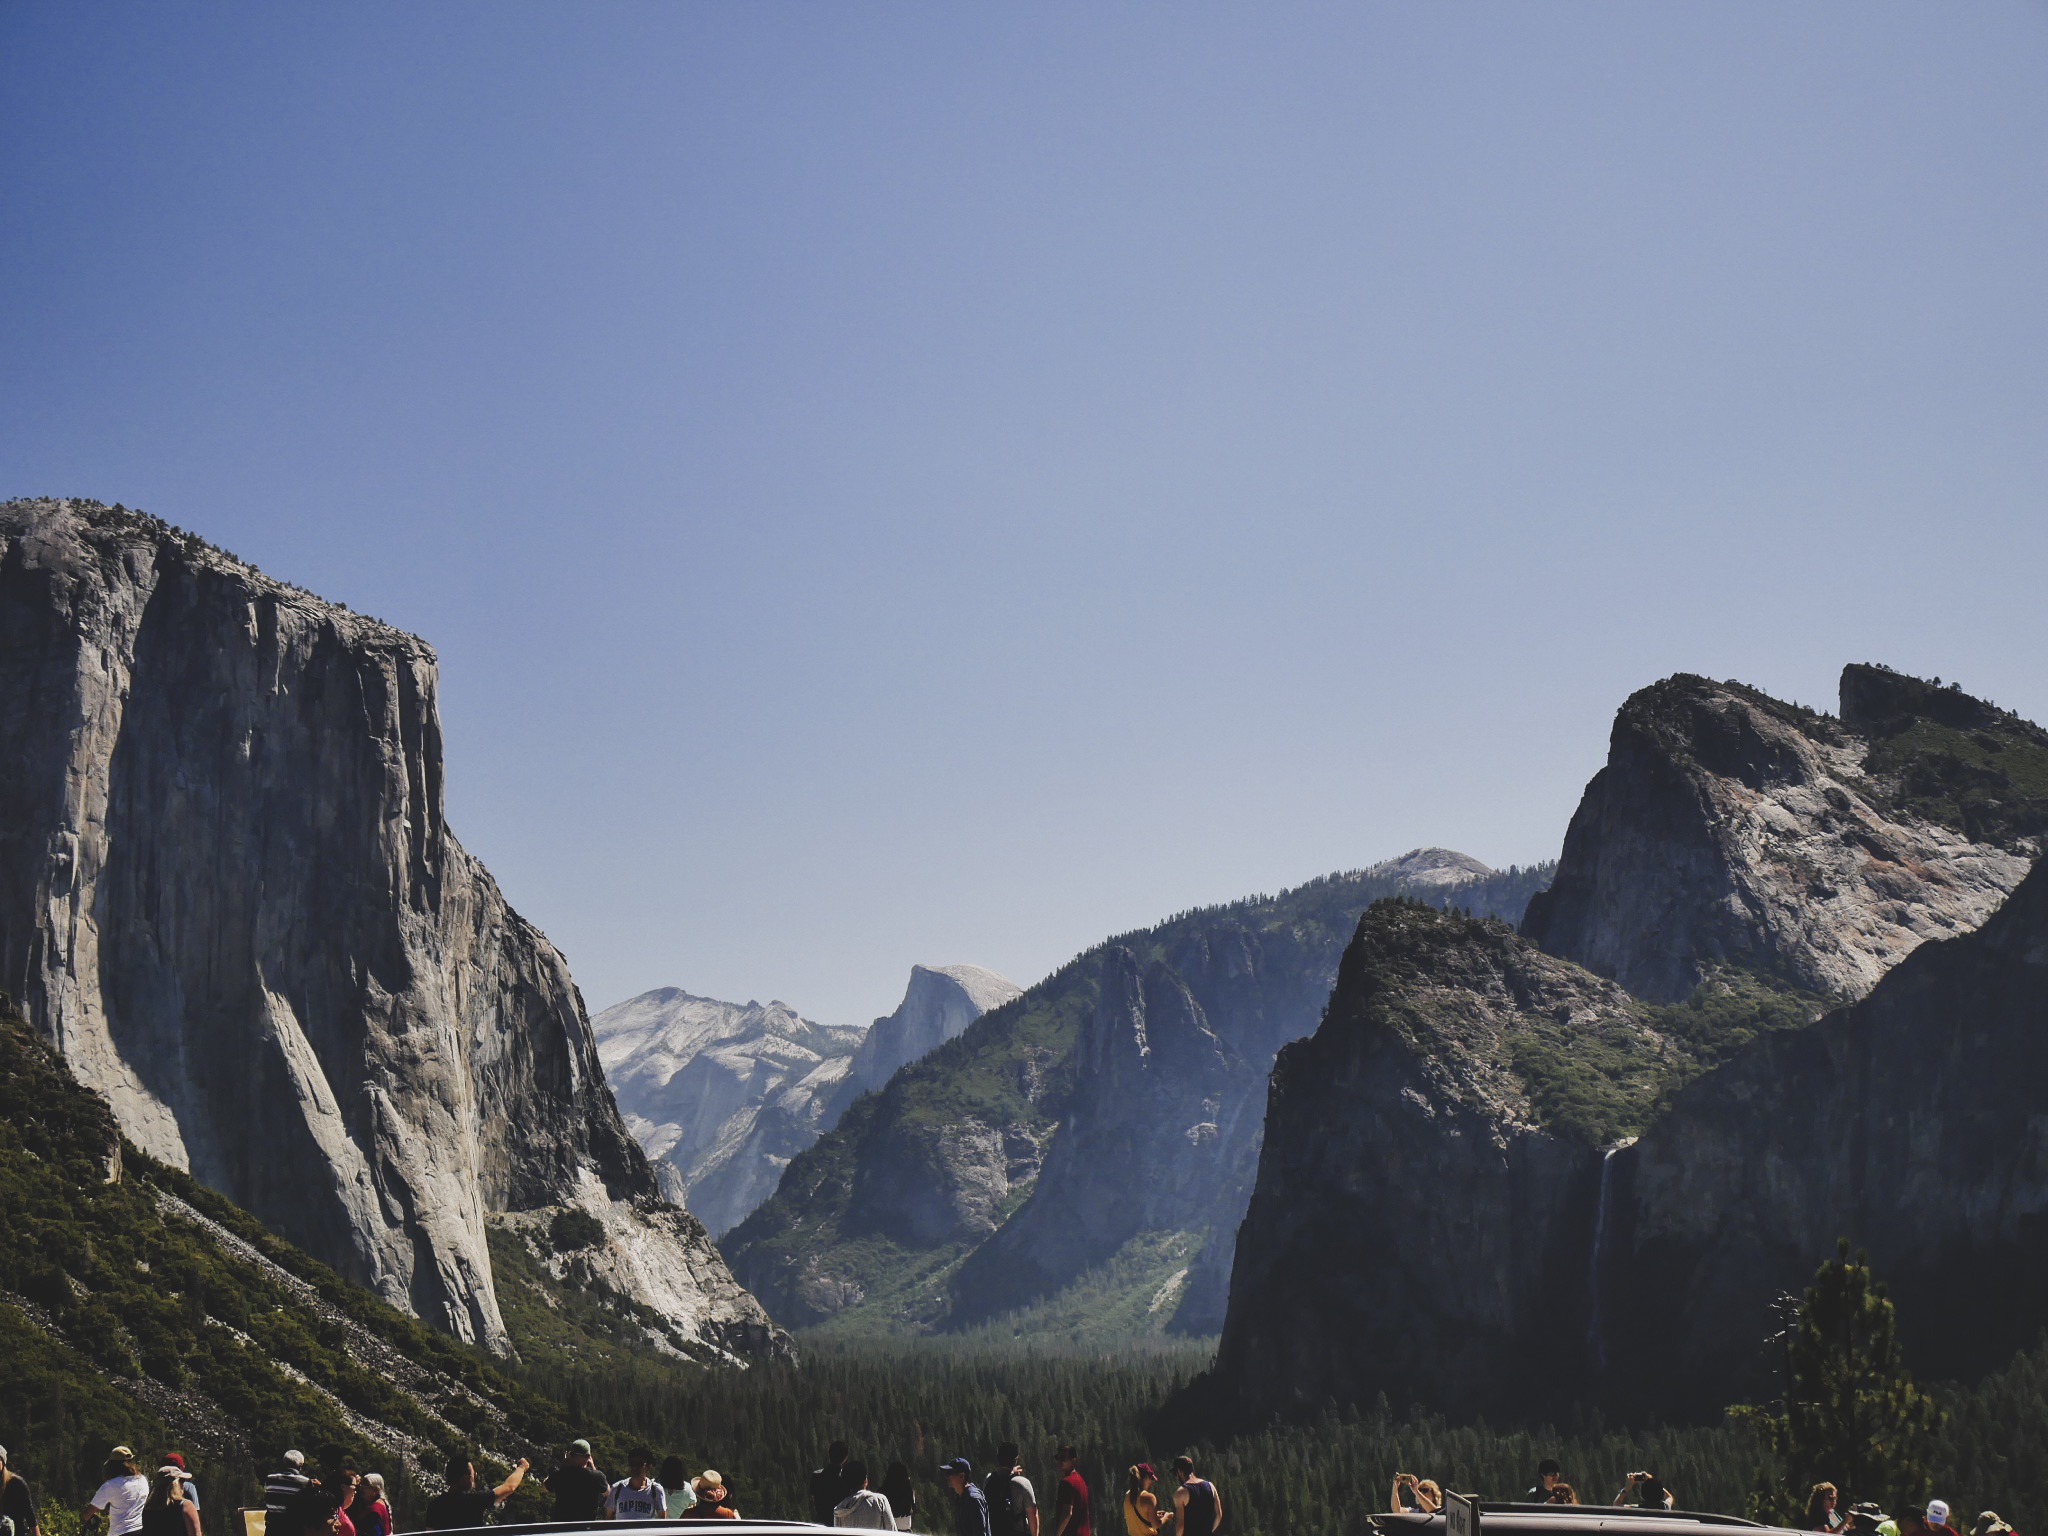 Yosemite National Park: 2-Day Itinerary in Summer